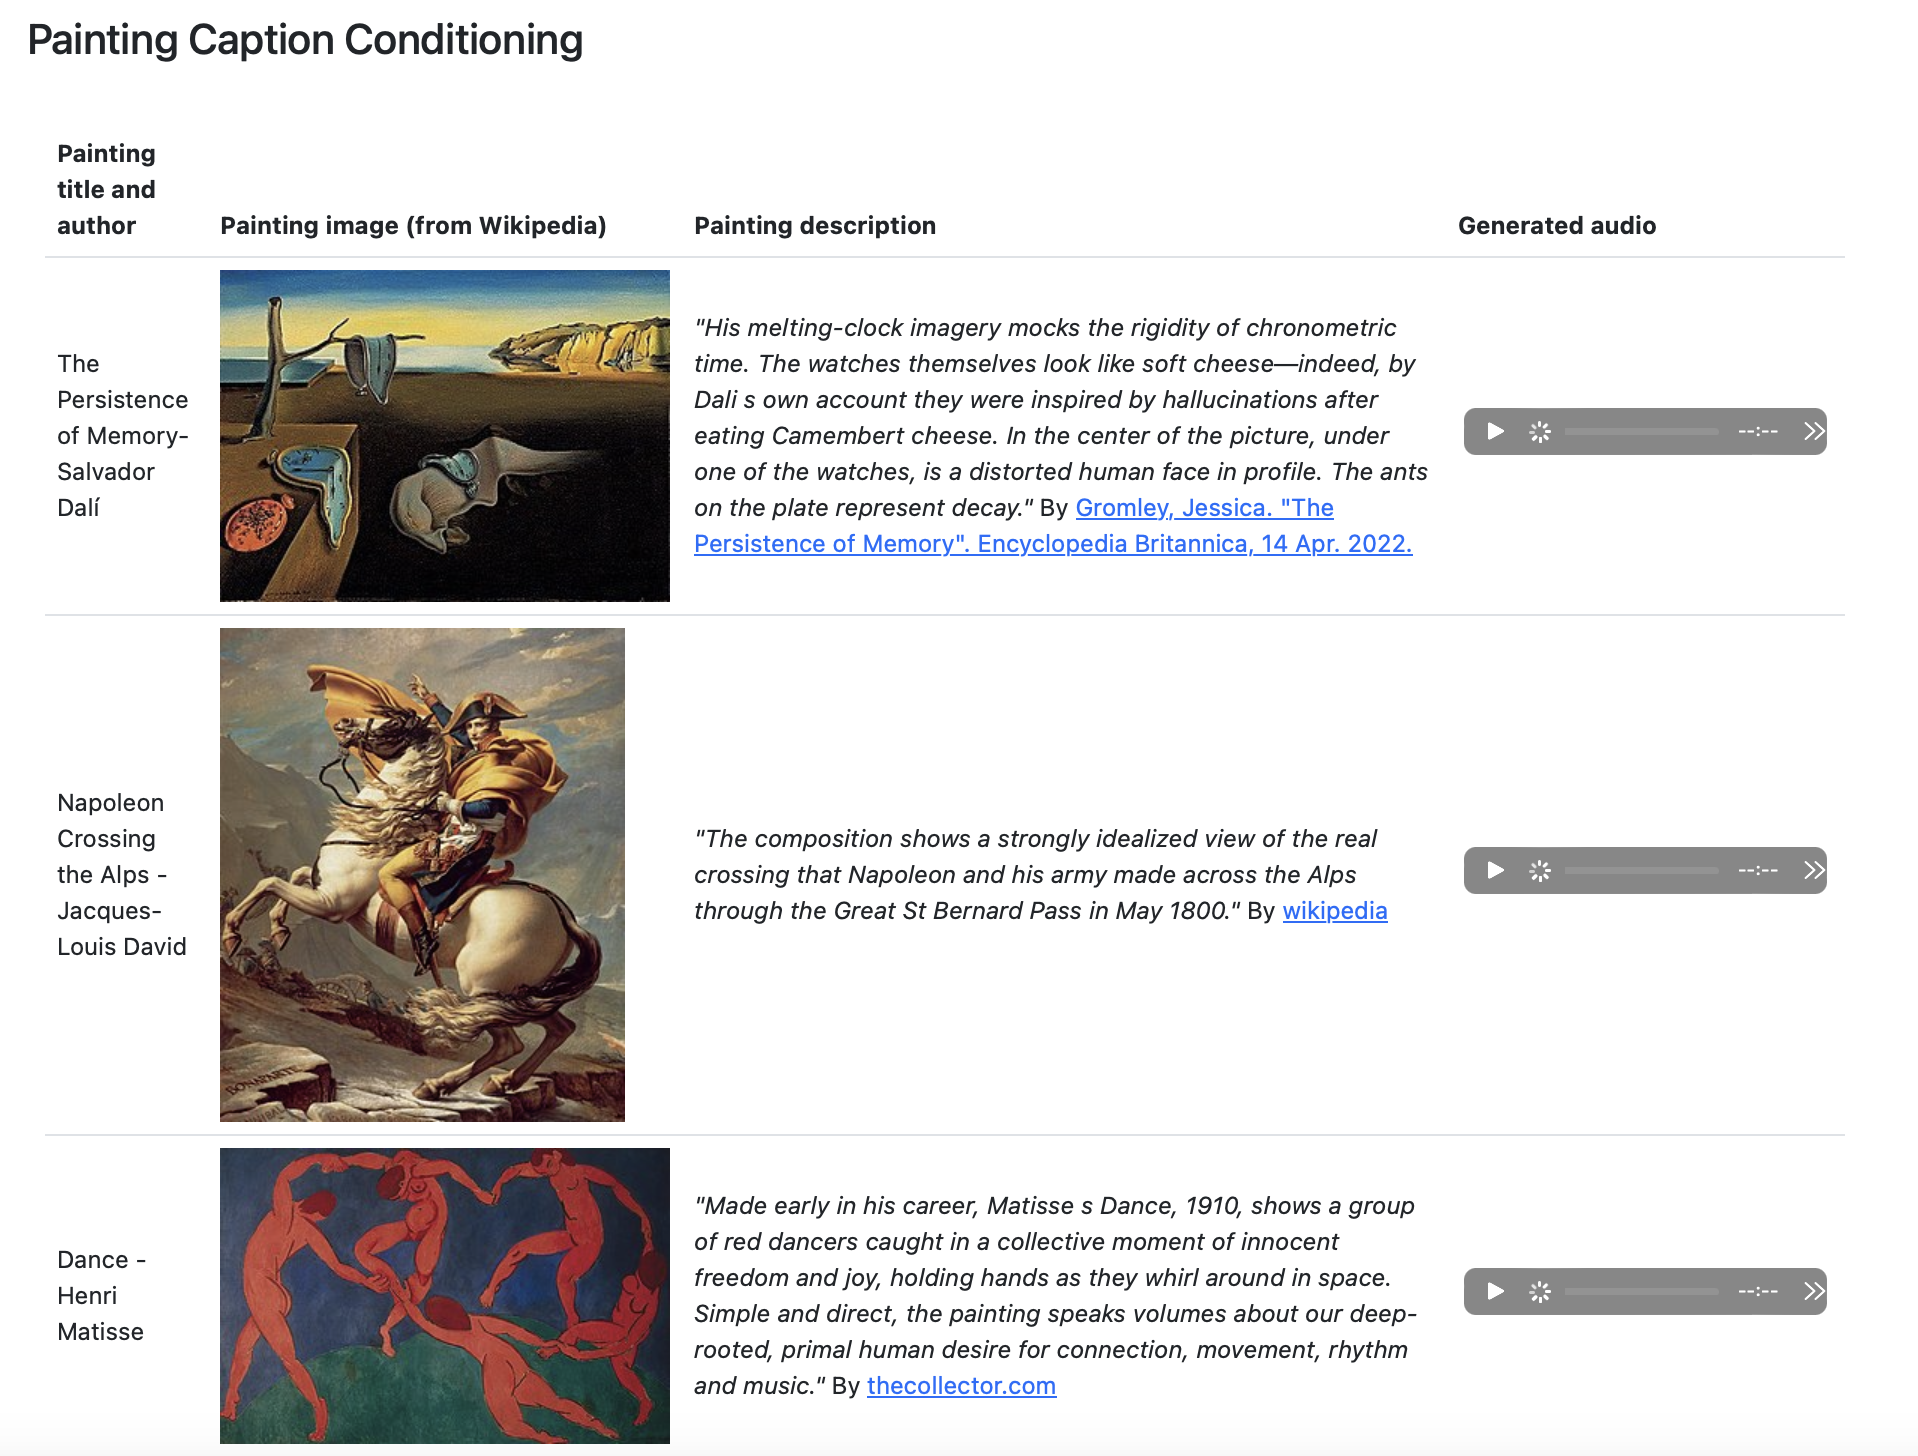 A screenshot of Google's Music LM's examples of Painting Captioning Conditioning -- Dali's the Persistence of Memory, a portrait of Napoleon, and Henri Matisse's Dance are all converted to captions and then music is created from the captions